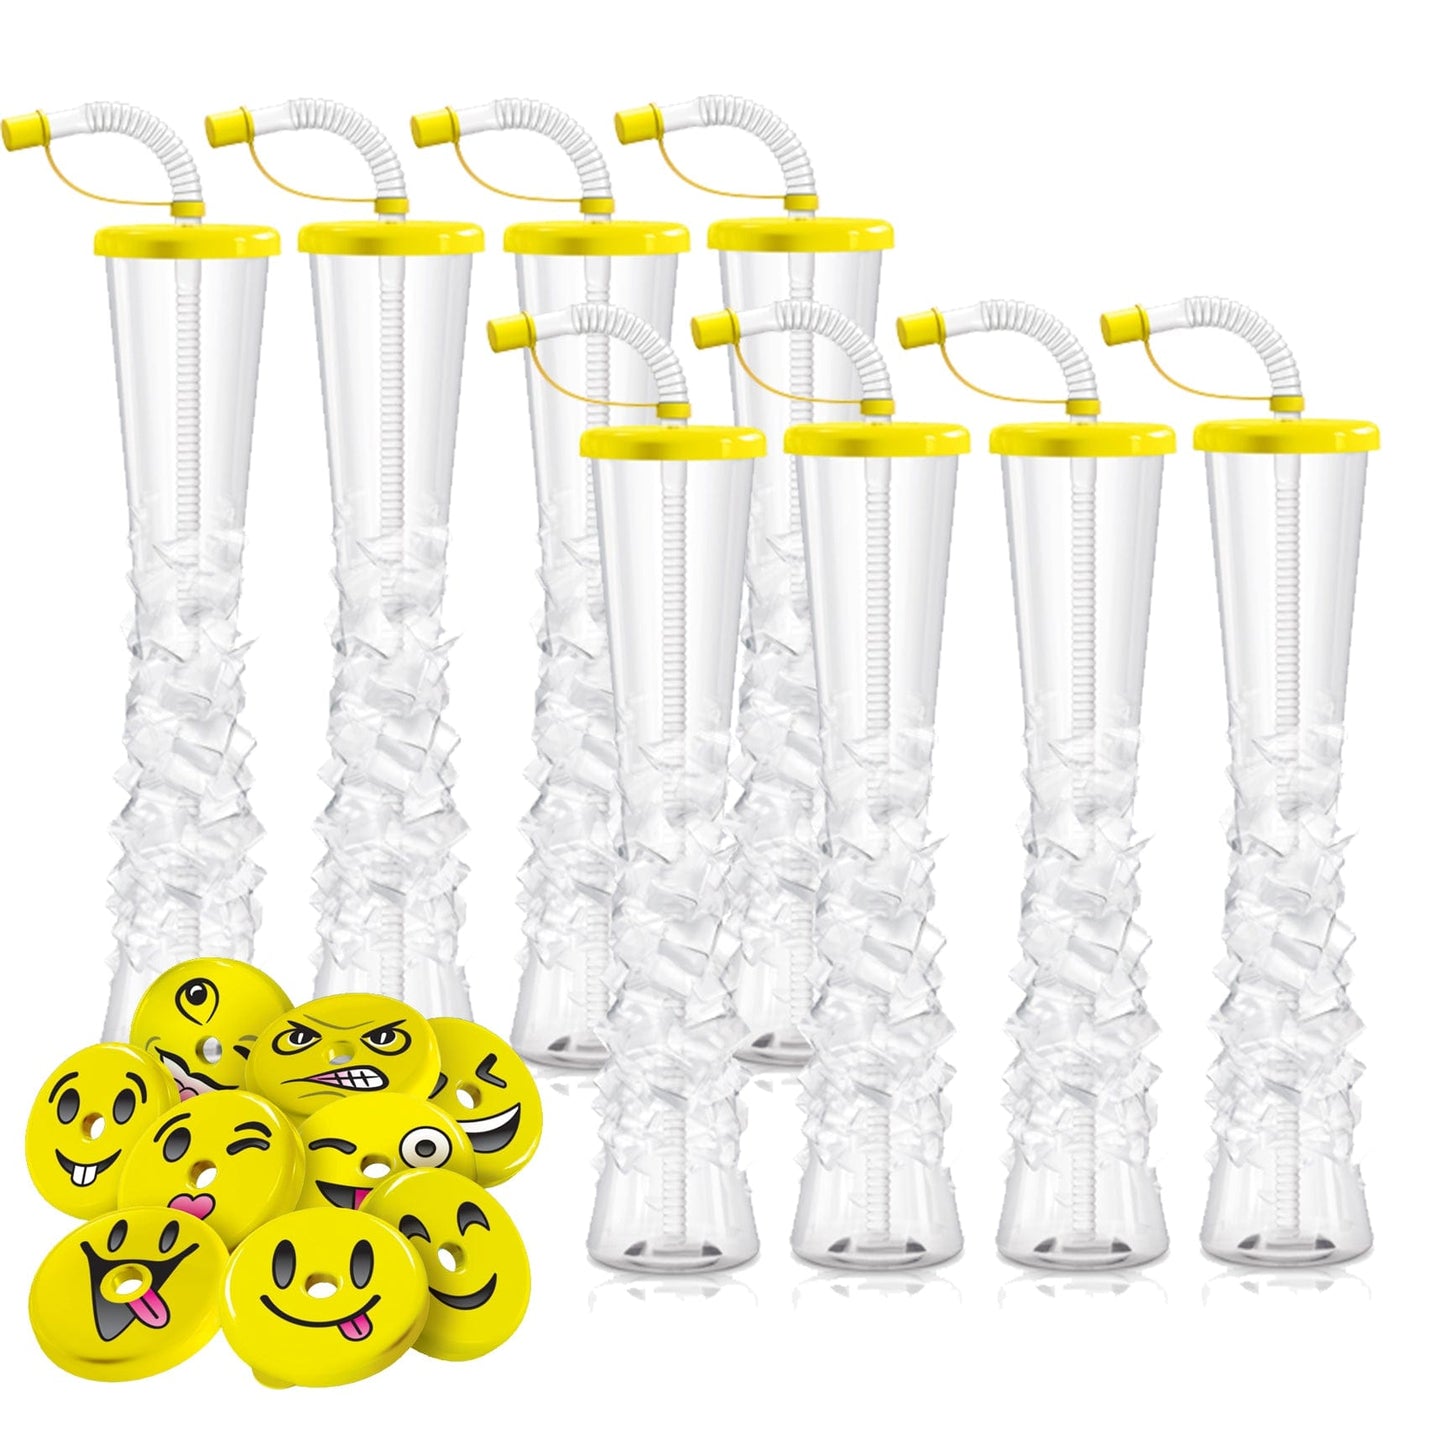 Sweet World USA Yard Cups Copy of Smiley Face Ice Yard Cups (54 Cups - Yellow Lids) - for Margaritas, Cold Drinks, Frozen Drinks, Kids Parties - 17 oz. (500 ml) cups with lids and straws